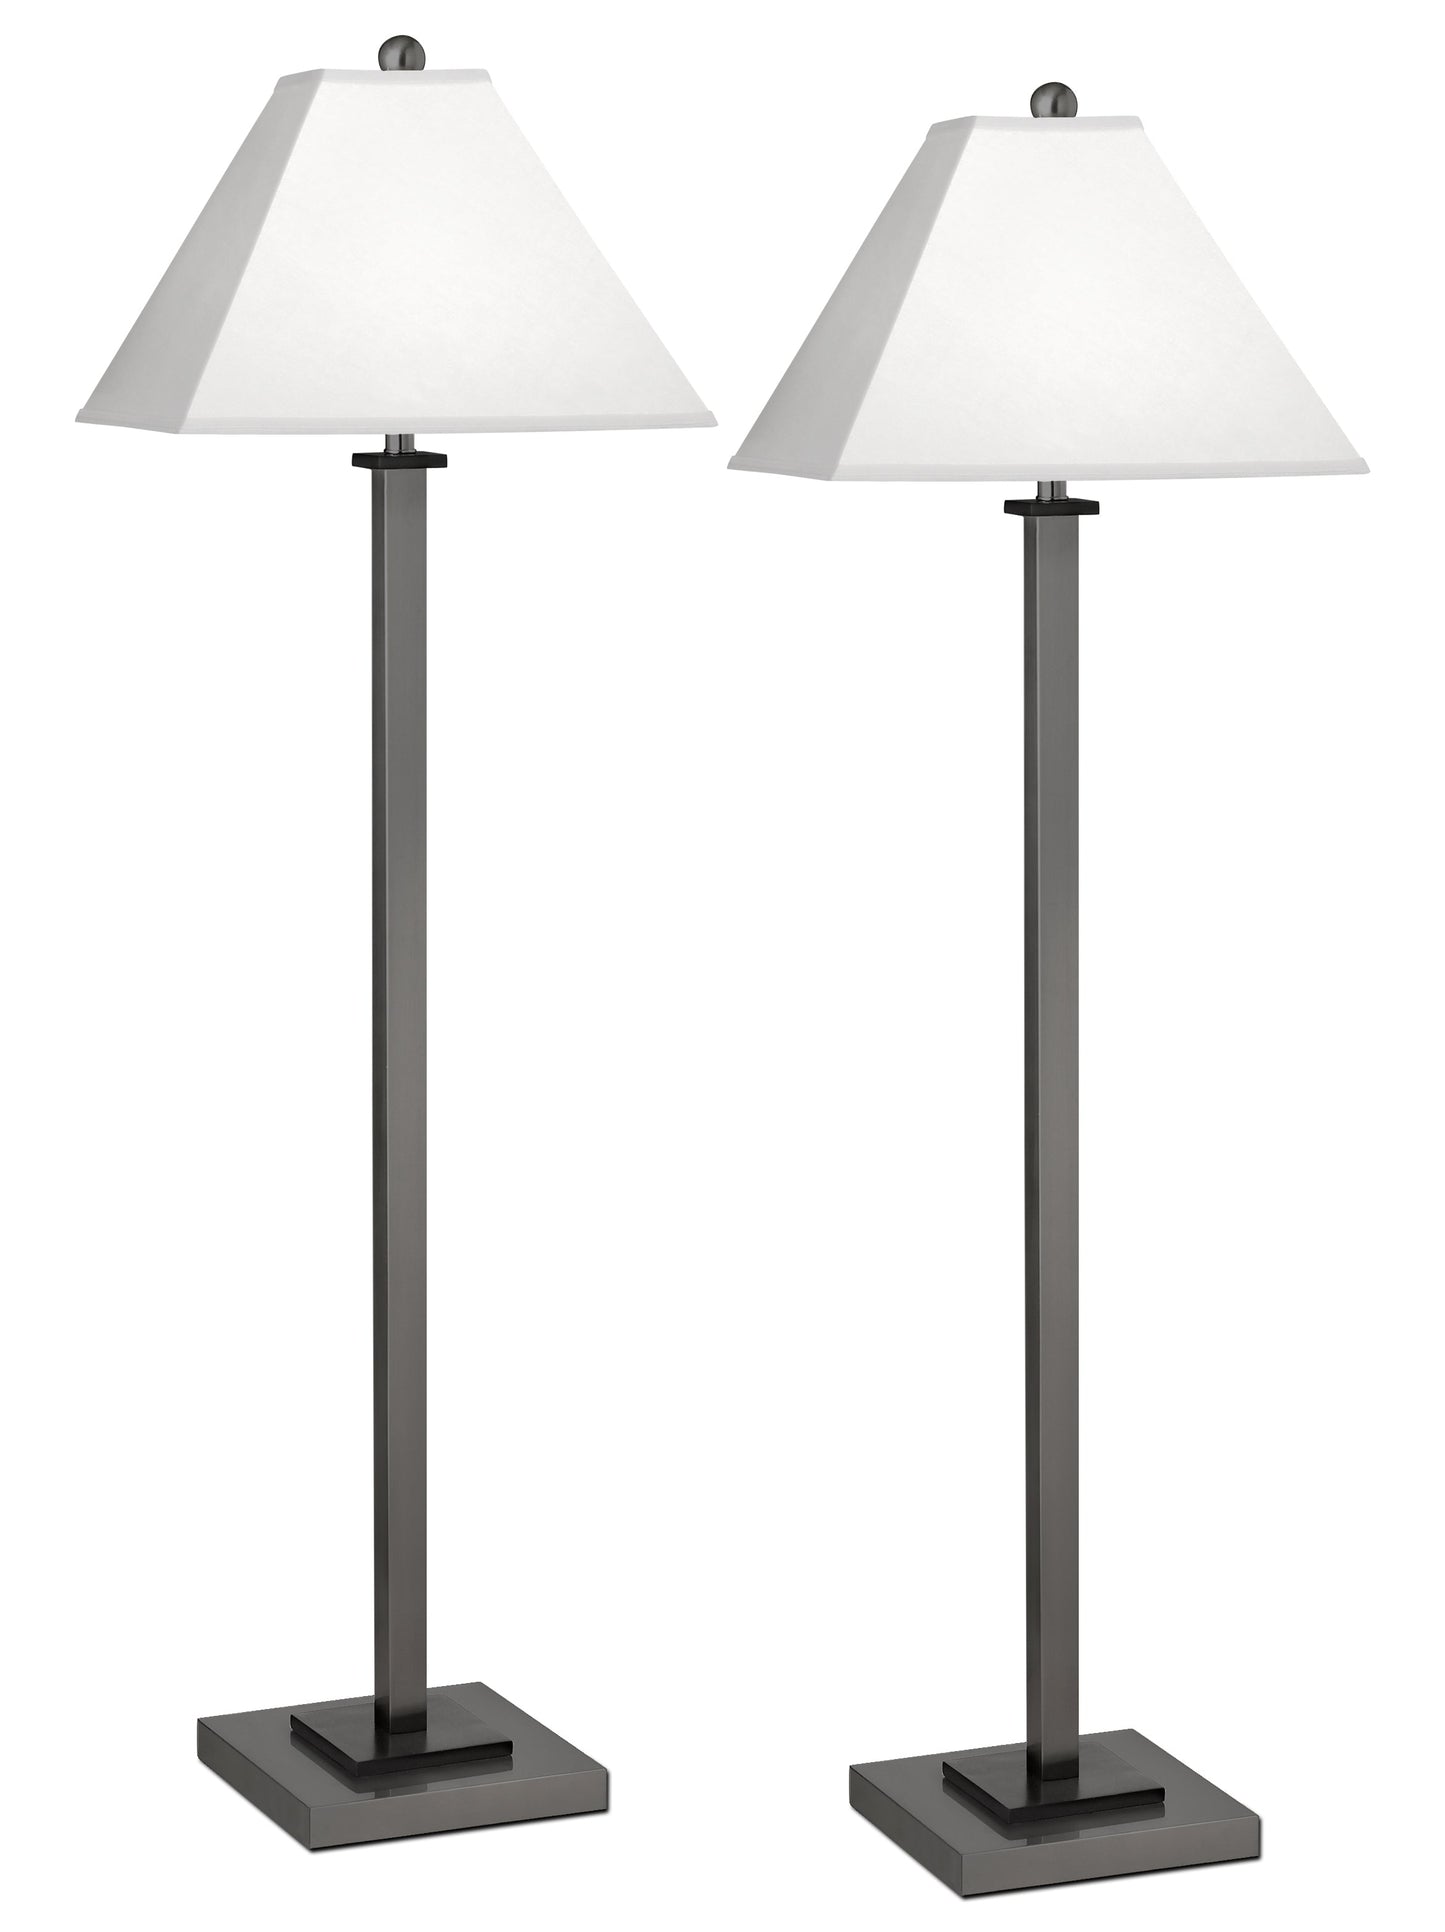 Medallion Lighting Gunmetal Square Post 59" Gunmetal Black Accents Steel and Wood Floor Lamp With White Fabric Square Shade - Set of 2